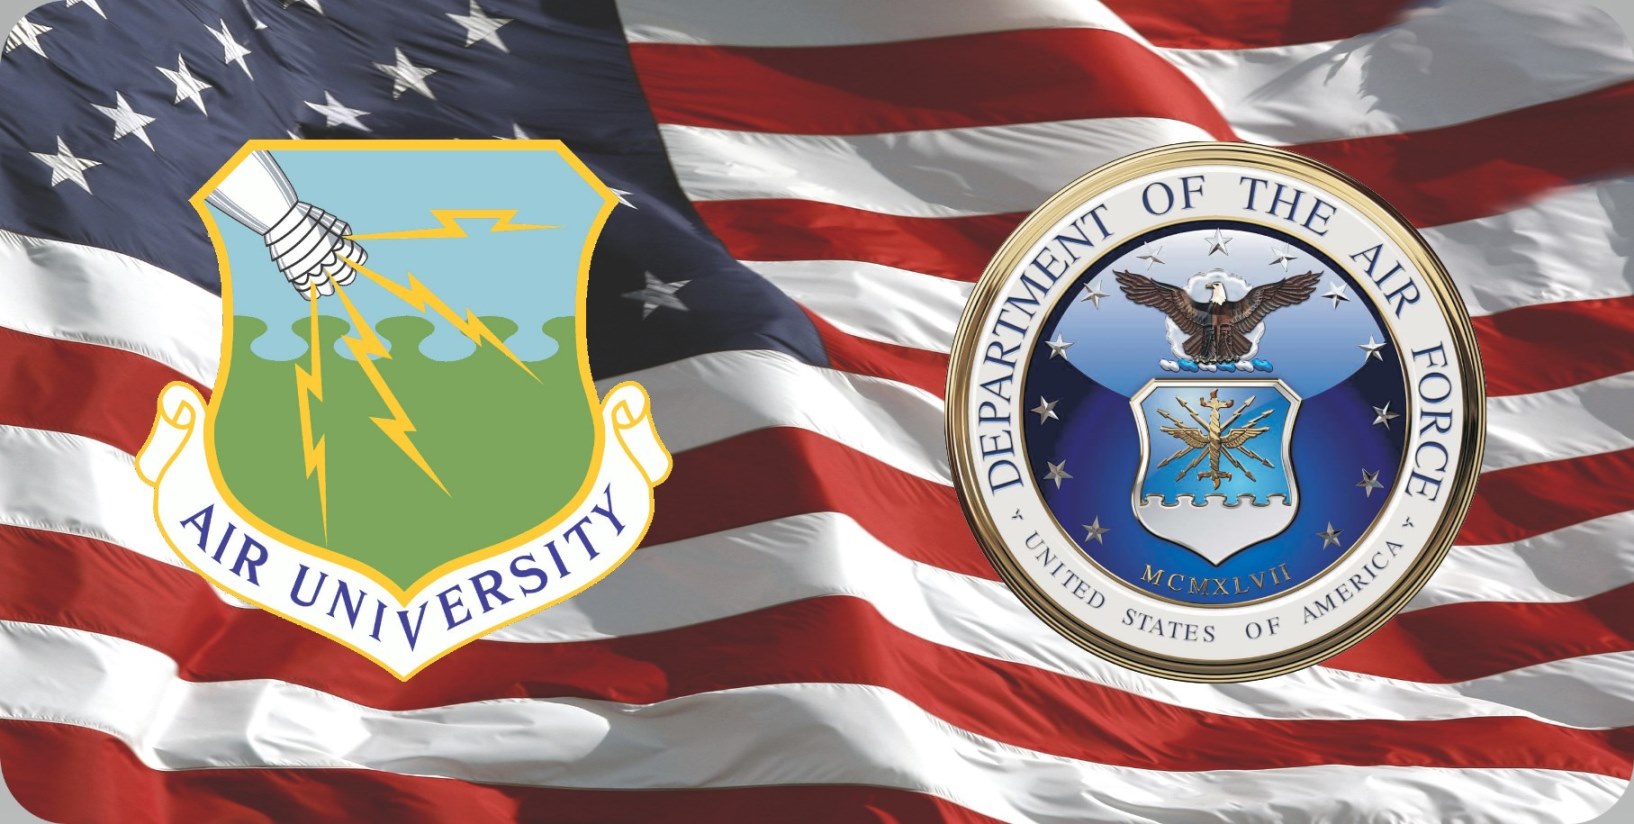 Air University Command & Air Force On U.S. FLAG Photo License Plate